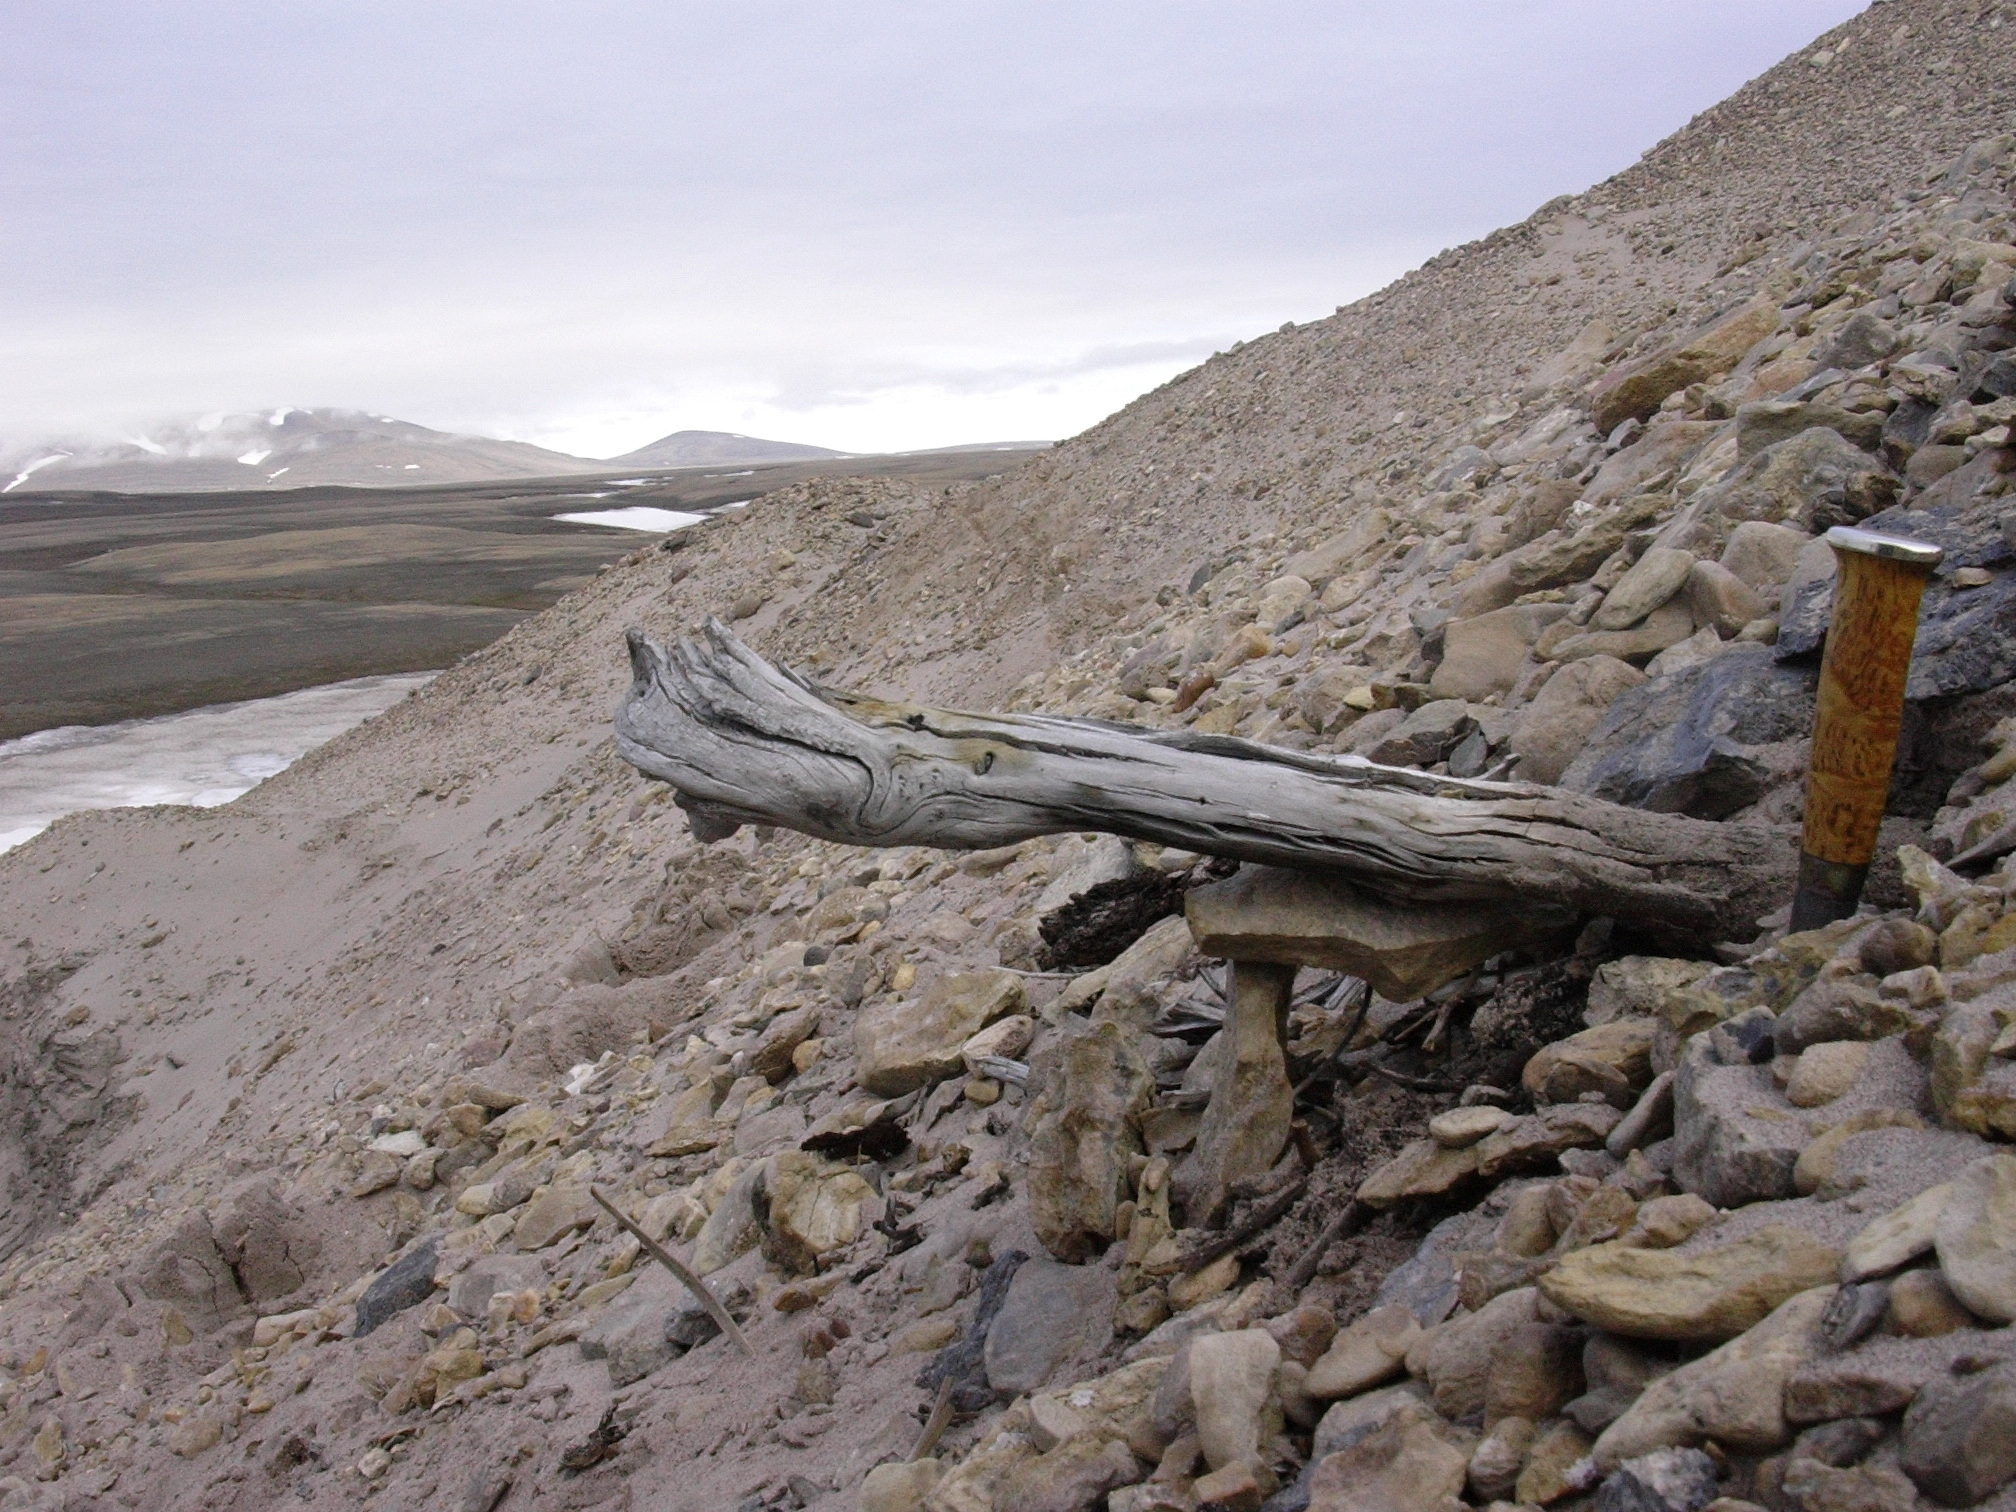 A two-million-year-old larch trunk is still trapped in permafrost in coastal deposits north of Greenland.  The wood was transported by rivers to the sea, eroding the formerly forested landscape (Svend Funder/Handout via REUTERS)